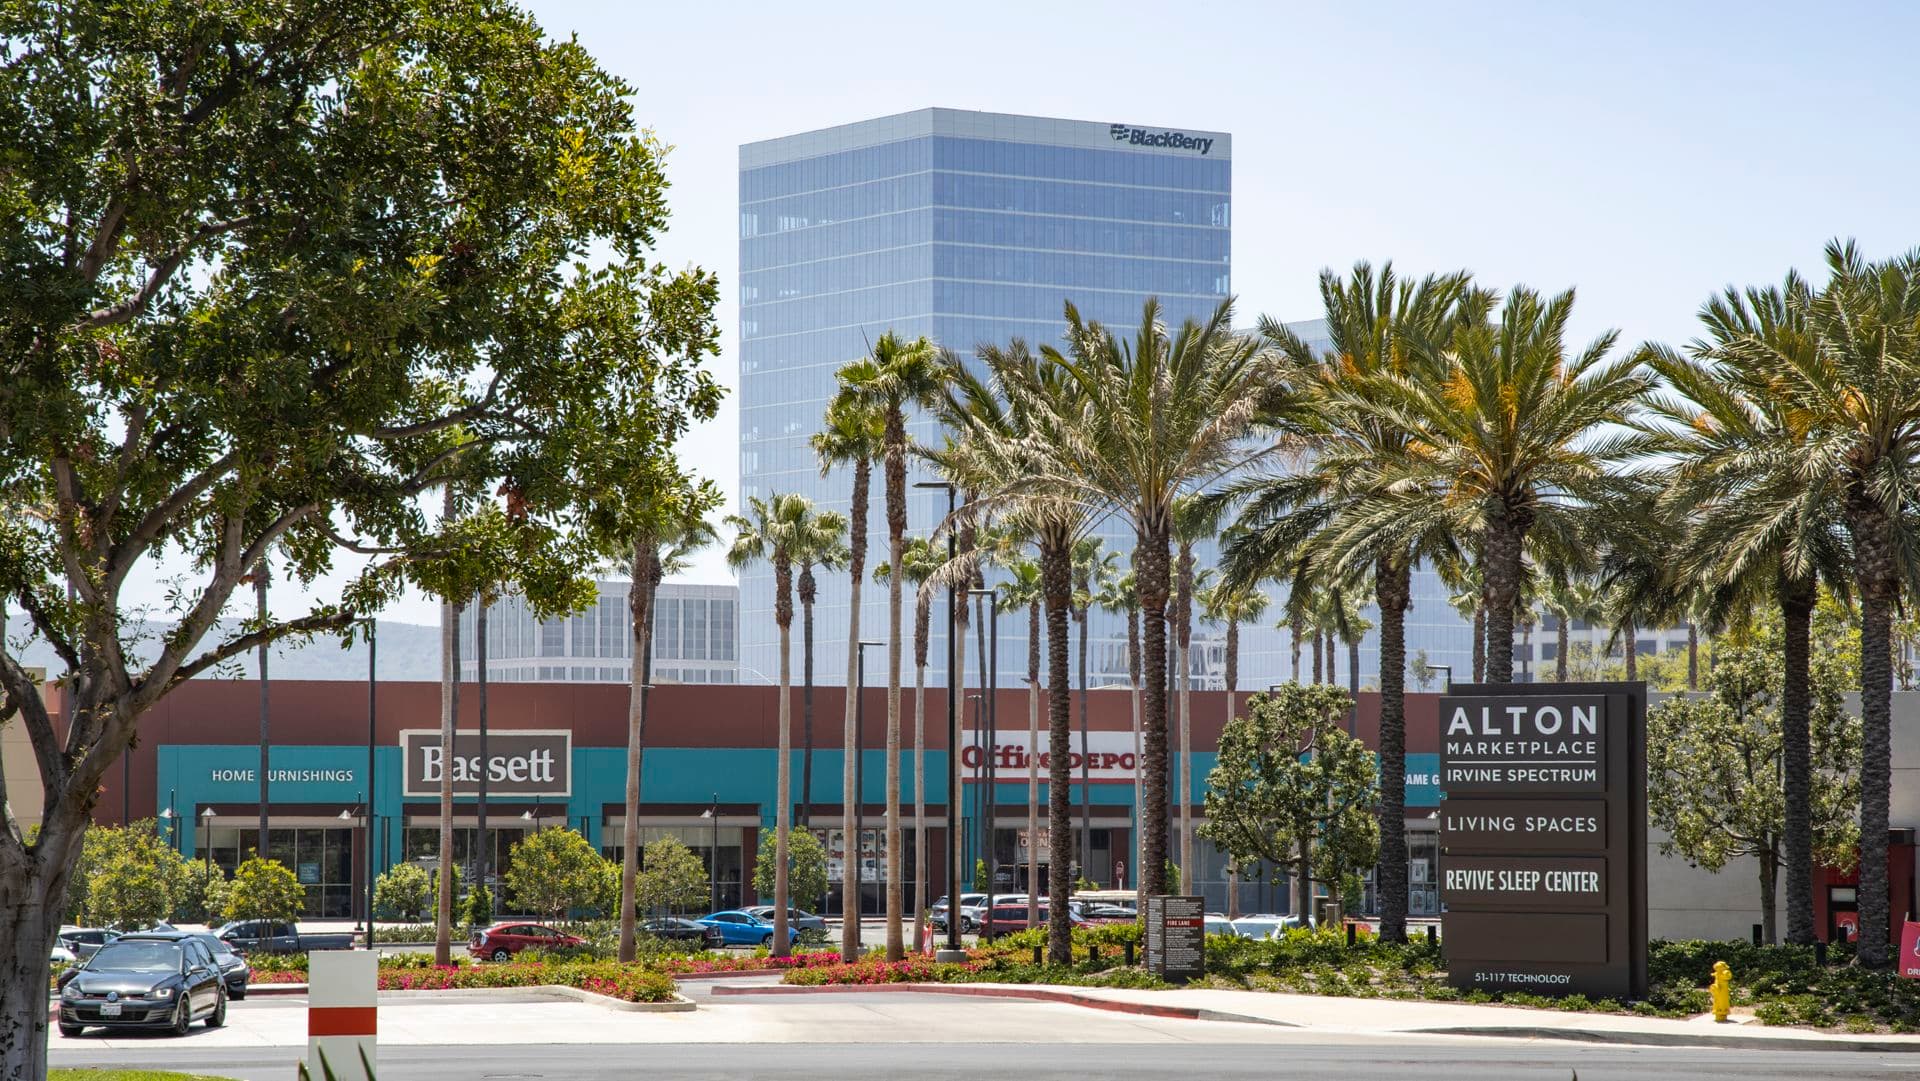 Exterior view of Alton Marketplace from 80 Technology at Lakeview Business Center in Irvine, CA.